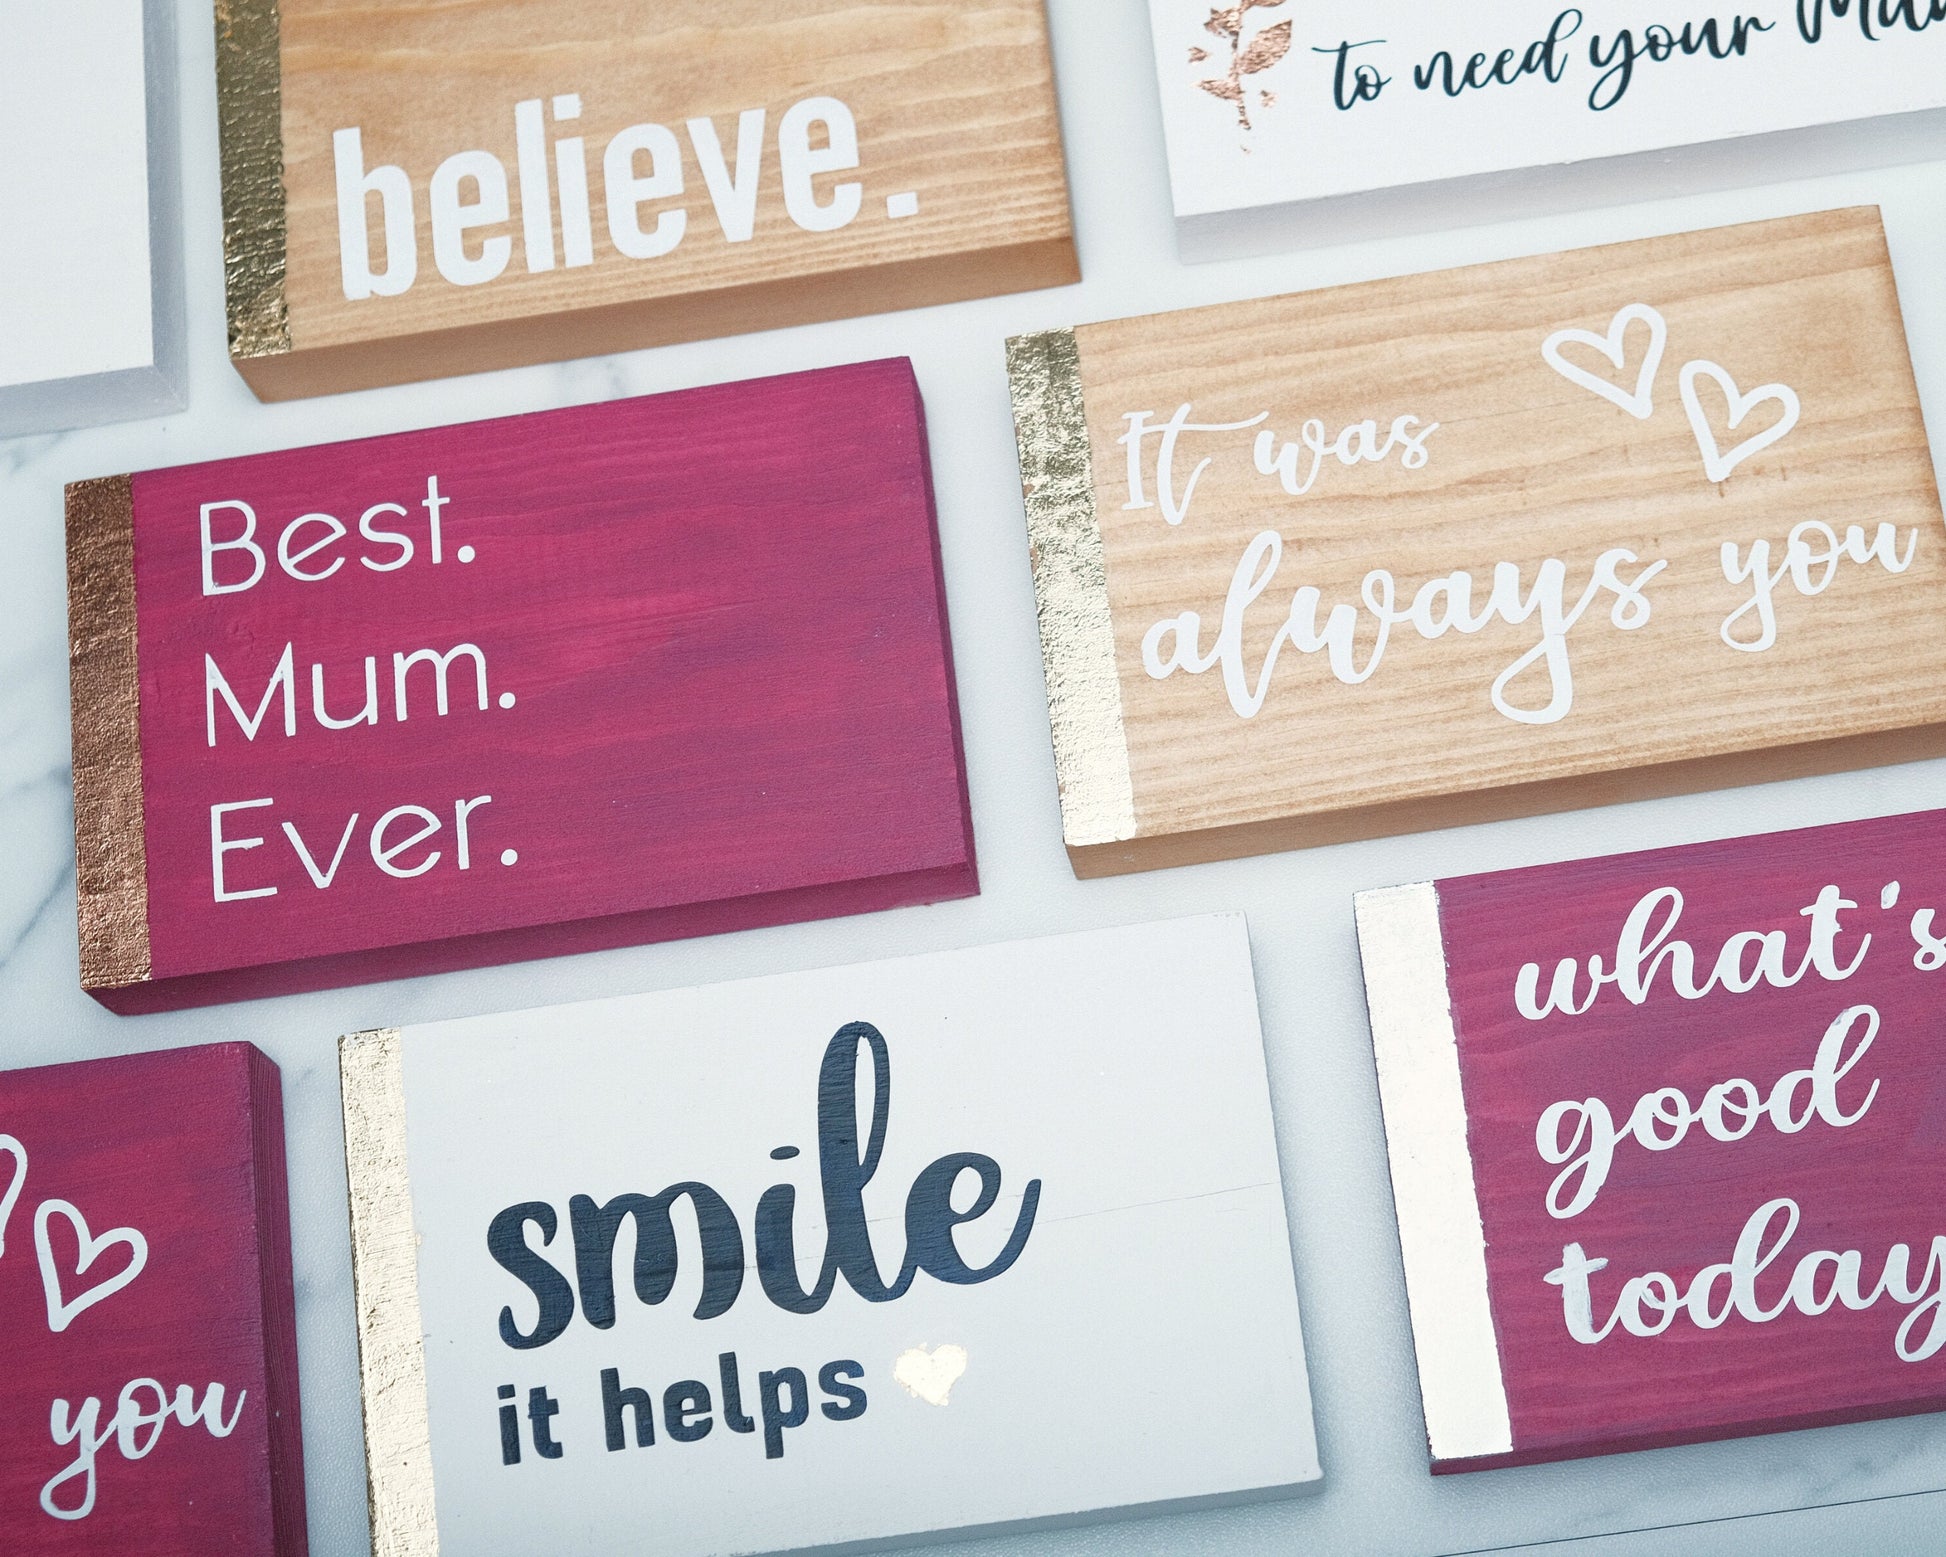 Eight small wooden signs in different colors and with different quotes.  Displayed as tiles on a white desk background, with some signs not fully in the photo. Photo taken from above looking down. Arranged to show other products offered by shop.